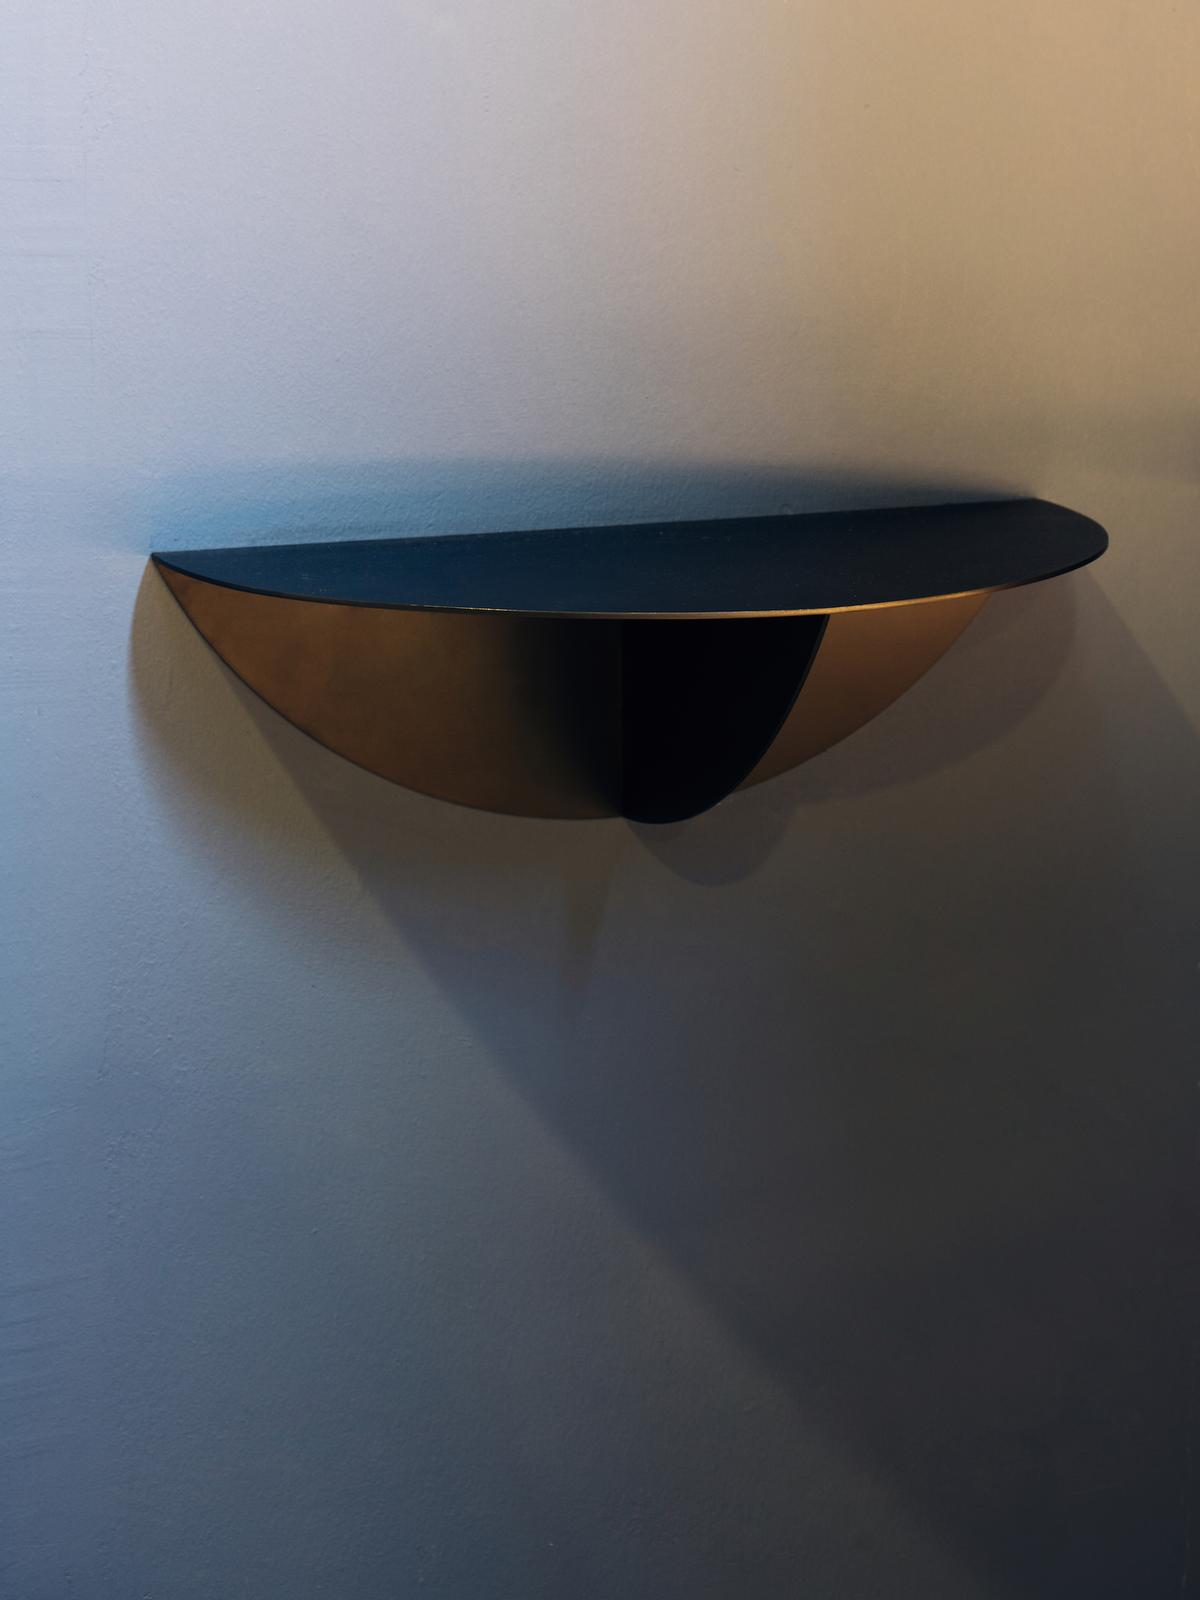 Semicircular metal tables project from the walls / Khoo Guo Jie